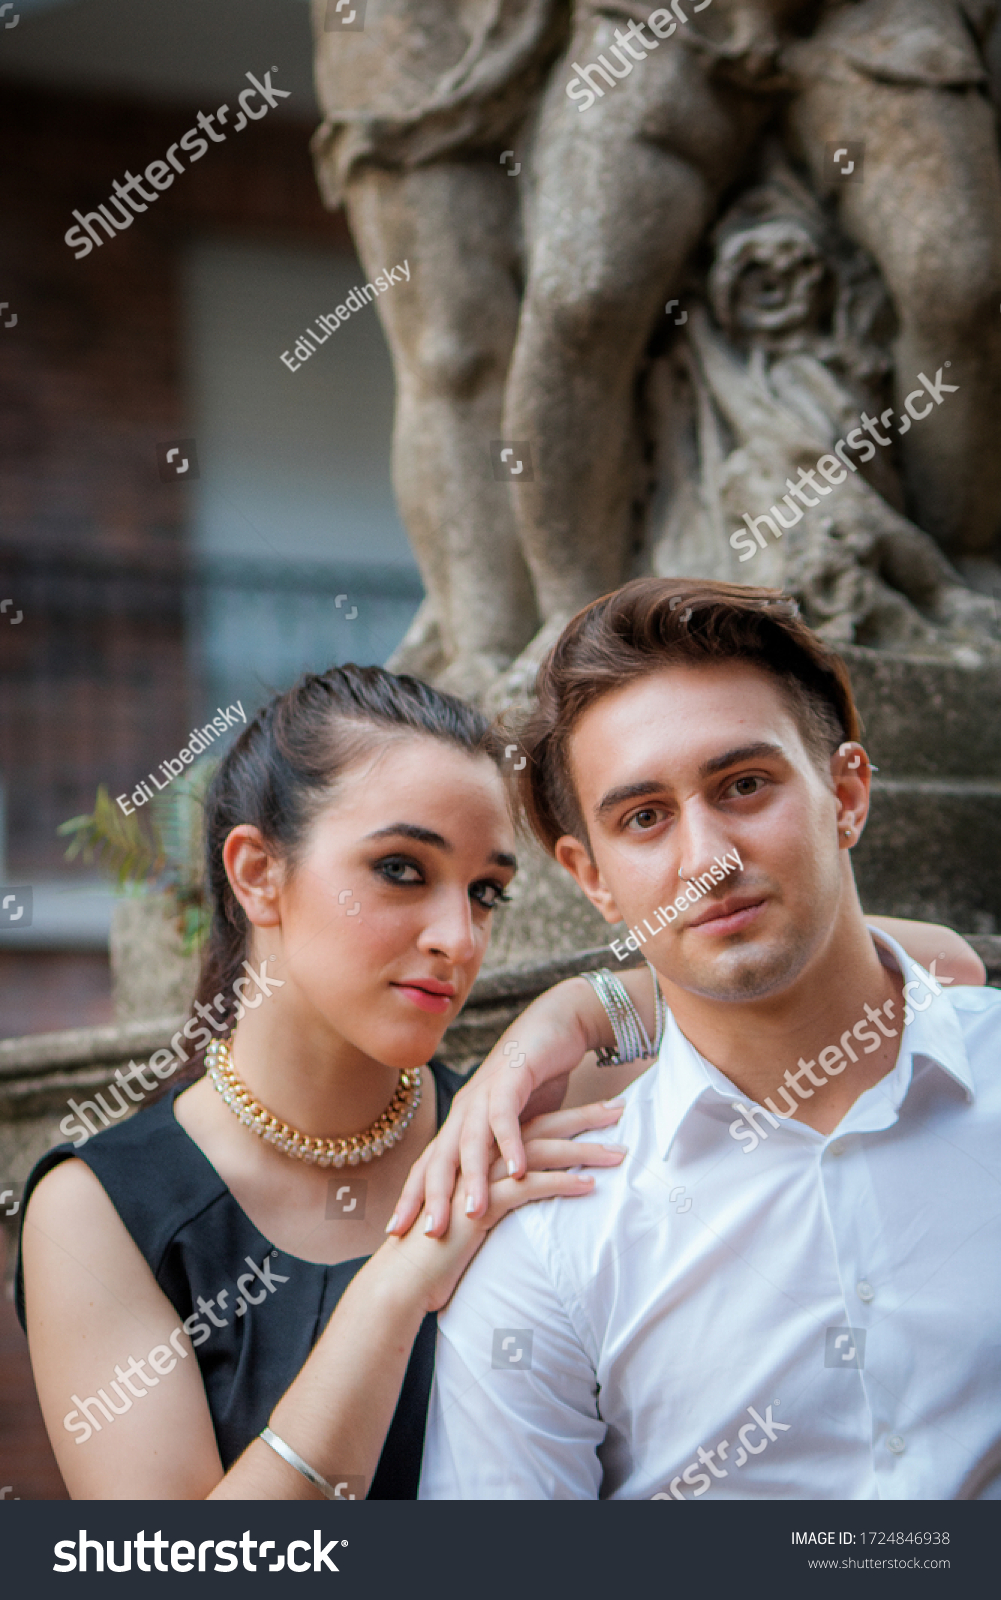 Buenos Aires, Argentina - October 7th 2019: Young couple in urban shoot. #1724846938